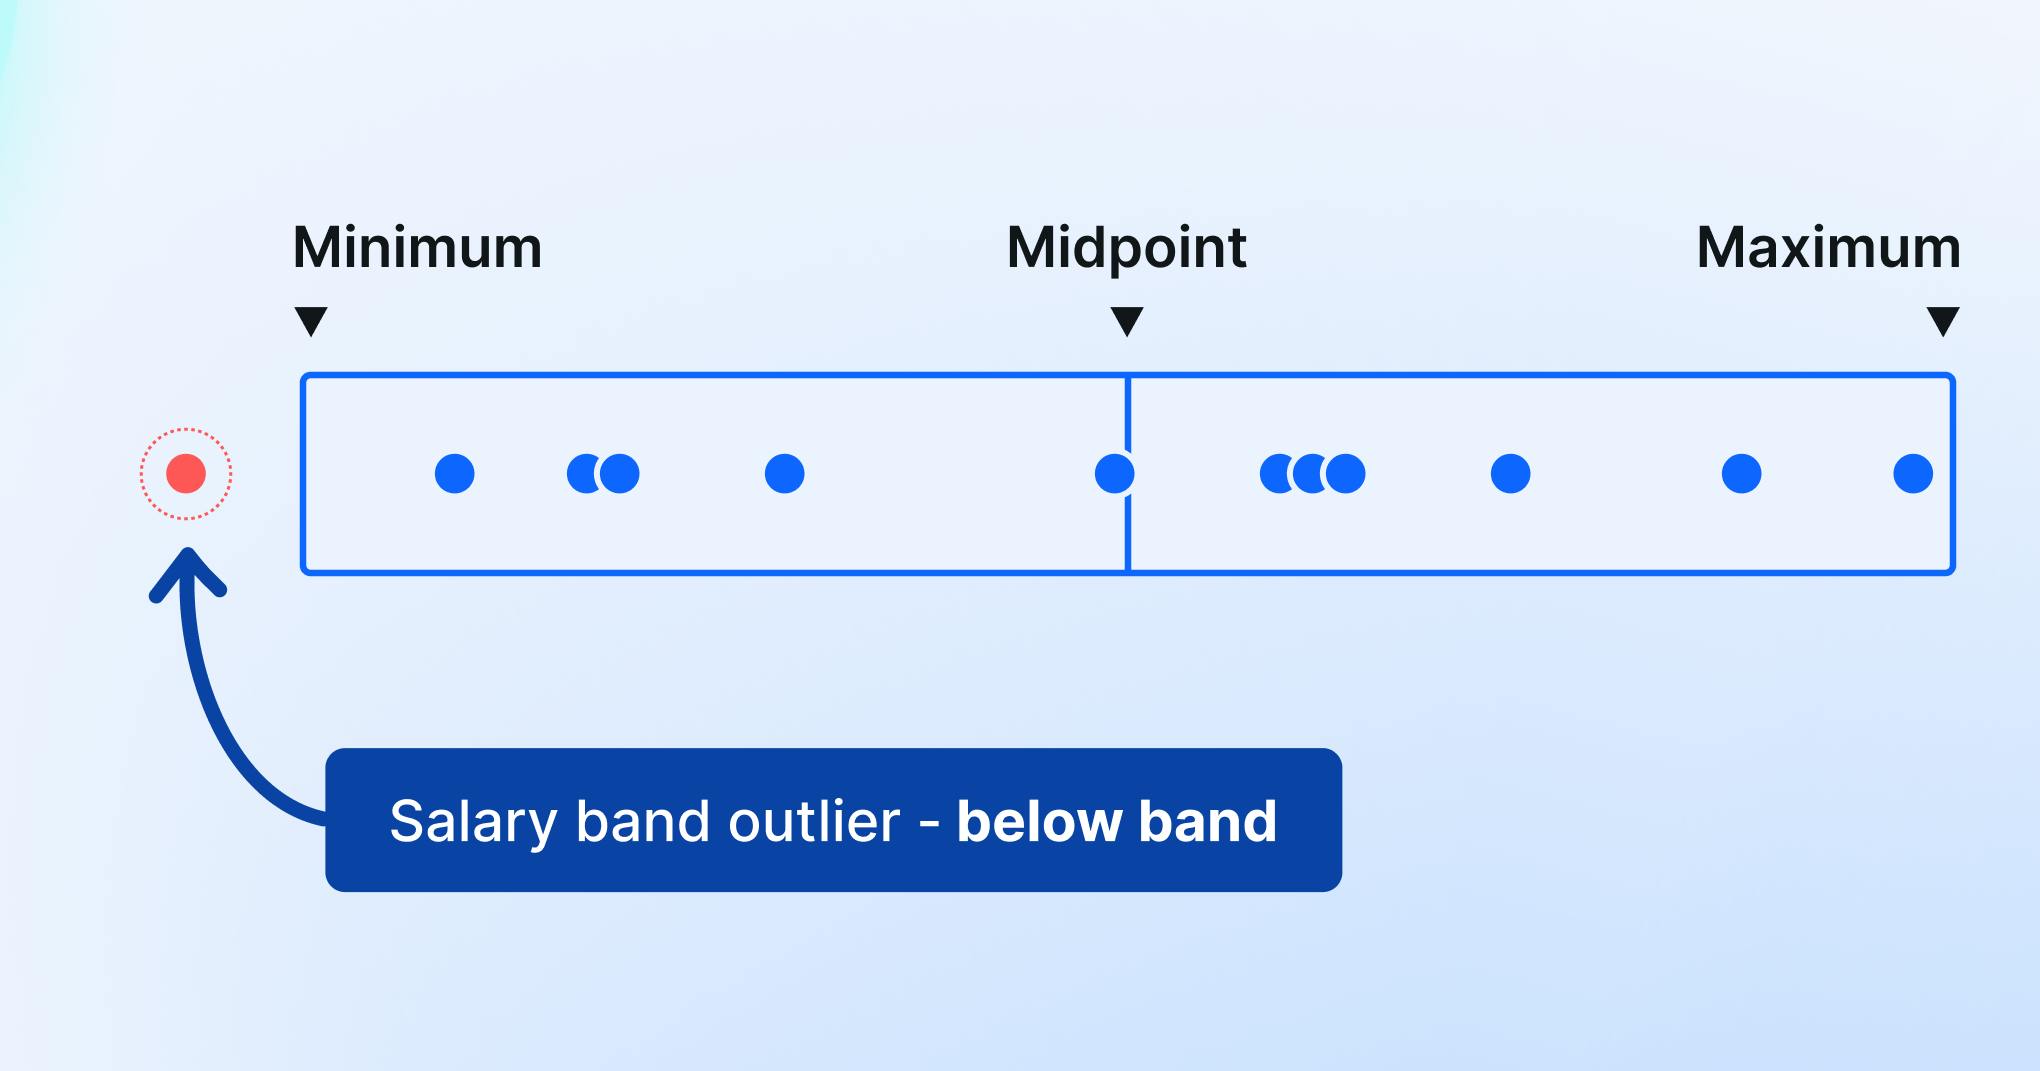 Salary band outlier shown below the band range